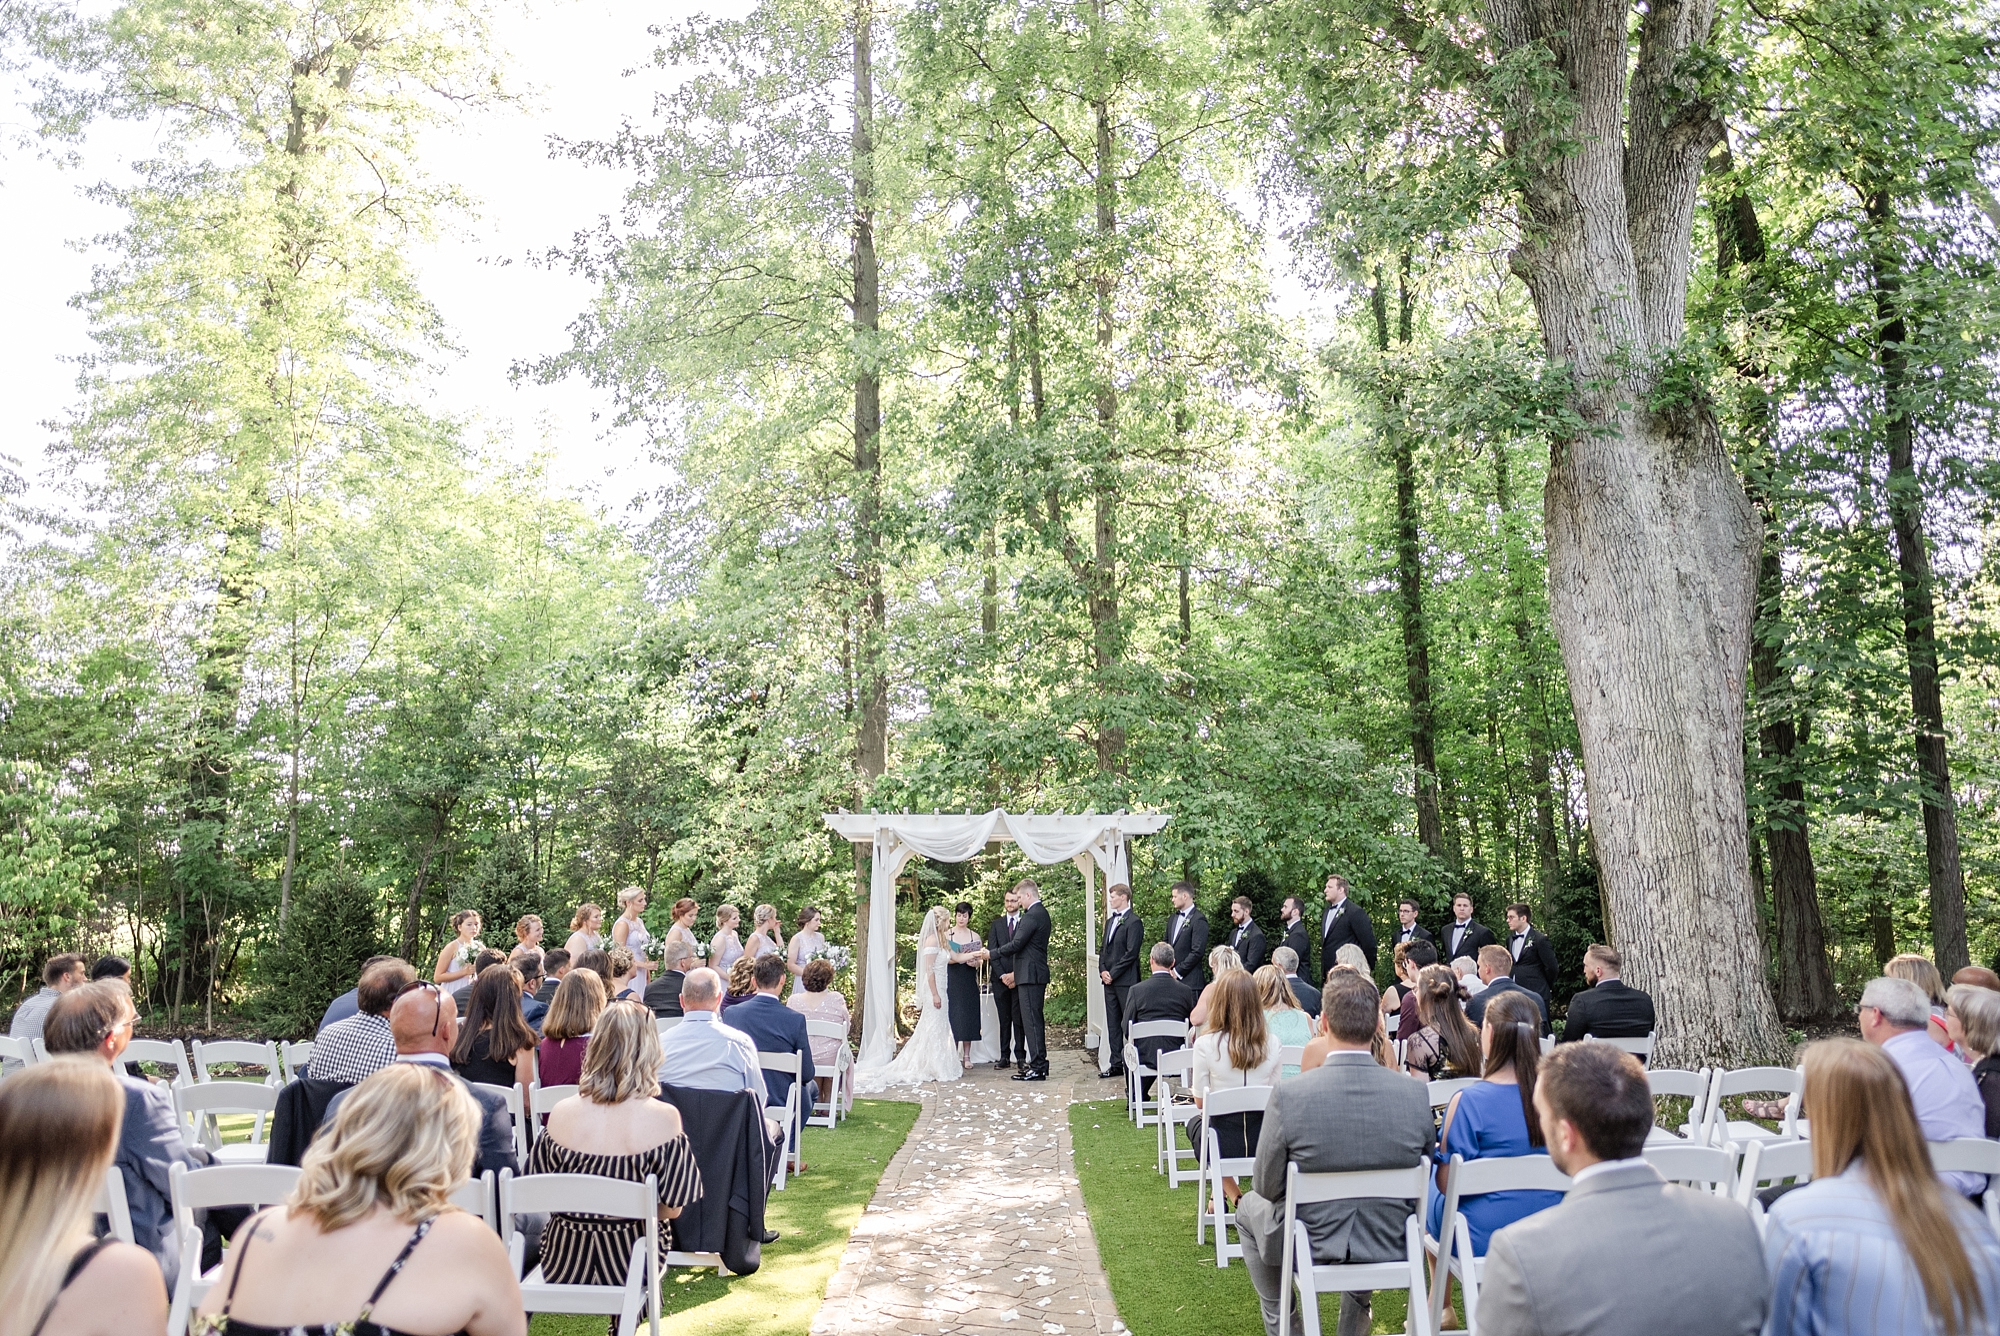 outdoor wedding ceremony with white arbor photographed by Stephanie Kase Photography